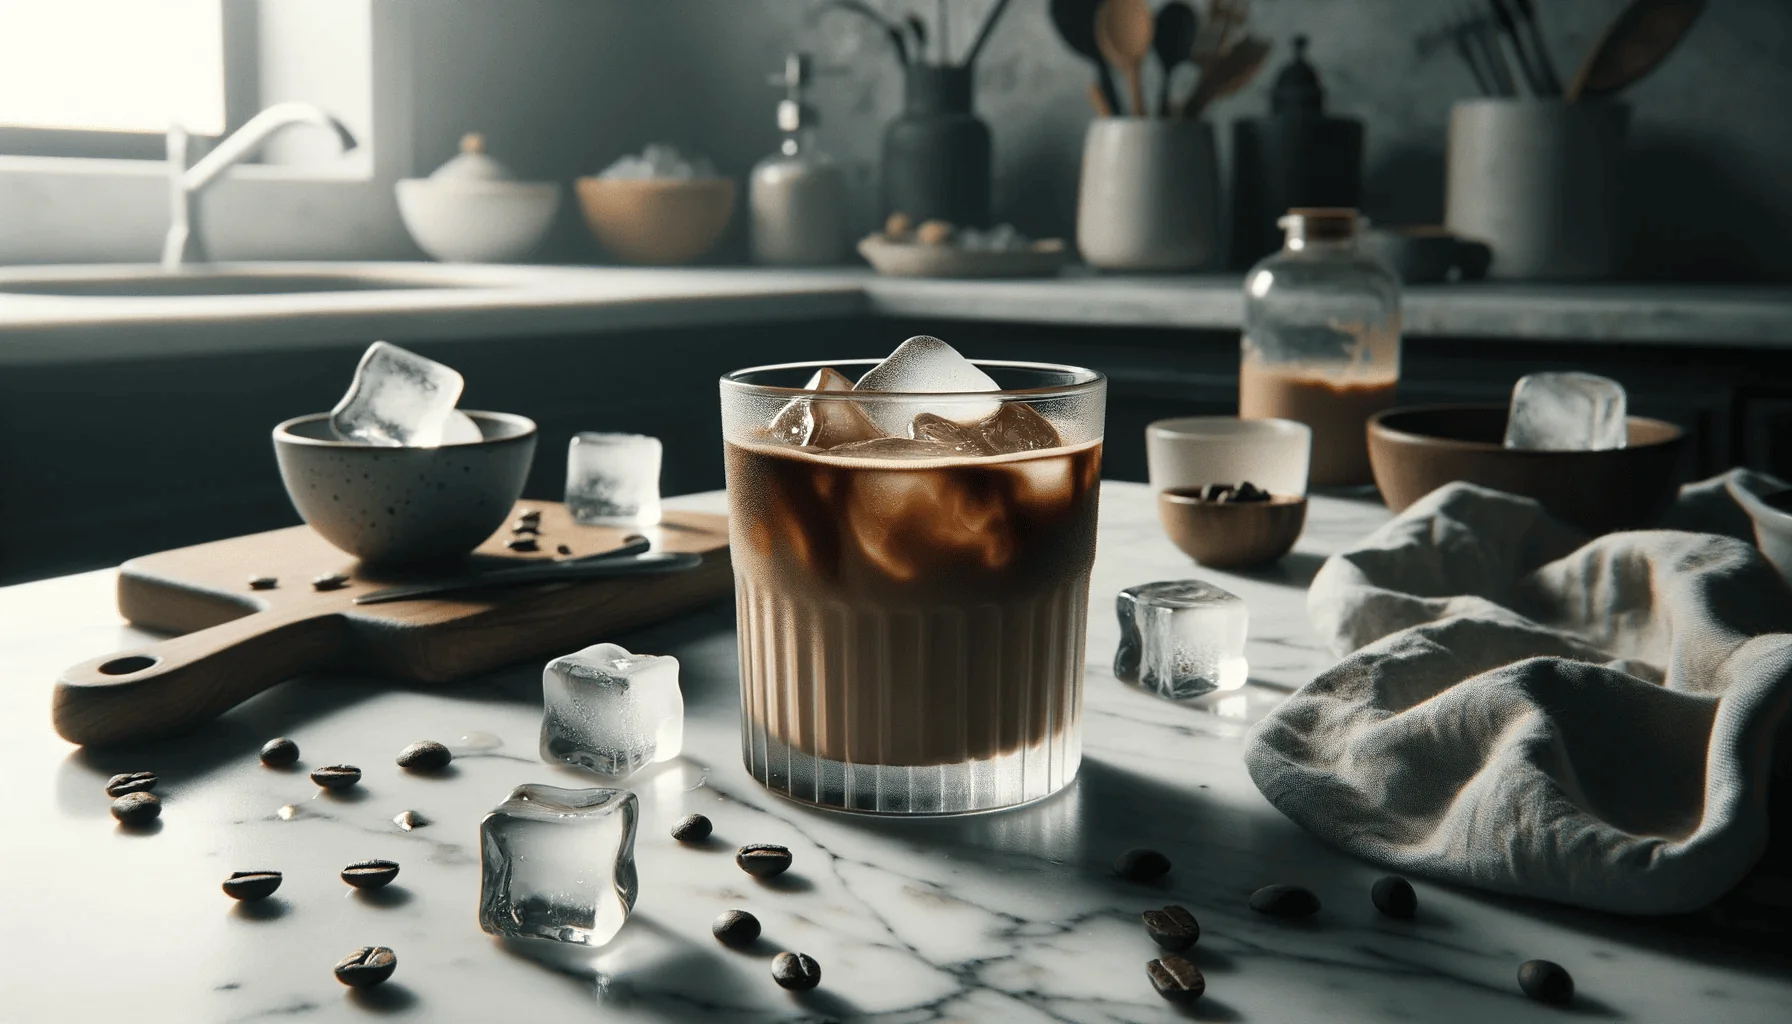 A glass filled with iced coffee, showcasing layers of milk and coffee mixing together, sits on a marble countertop surrounded by ice cubes, coffee beans, and brewing equipment.